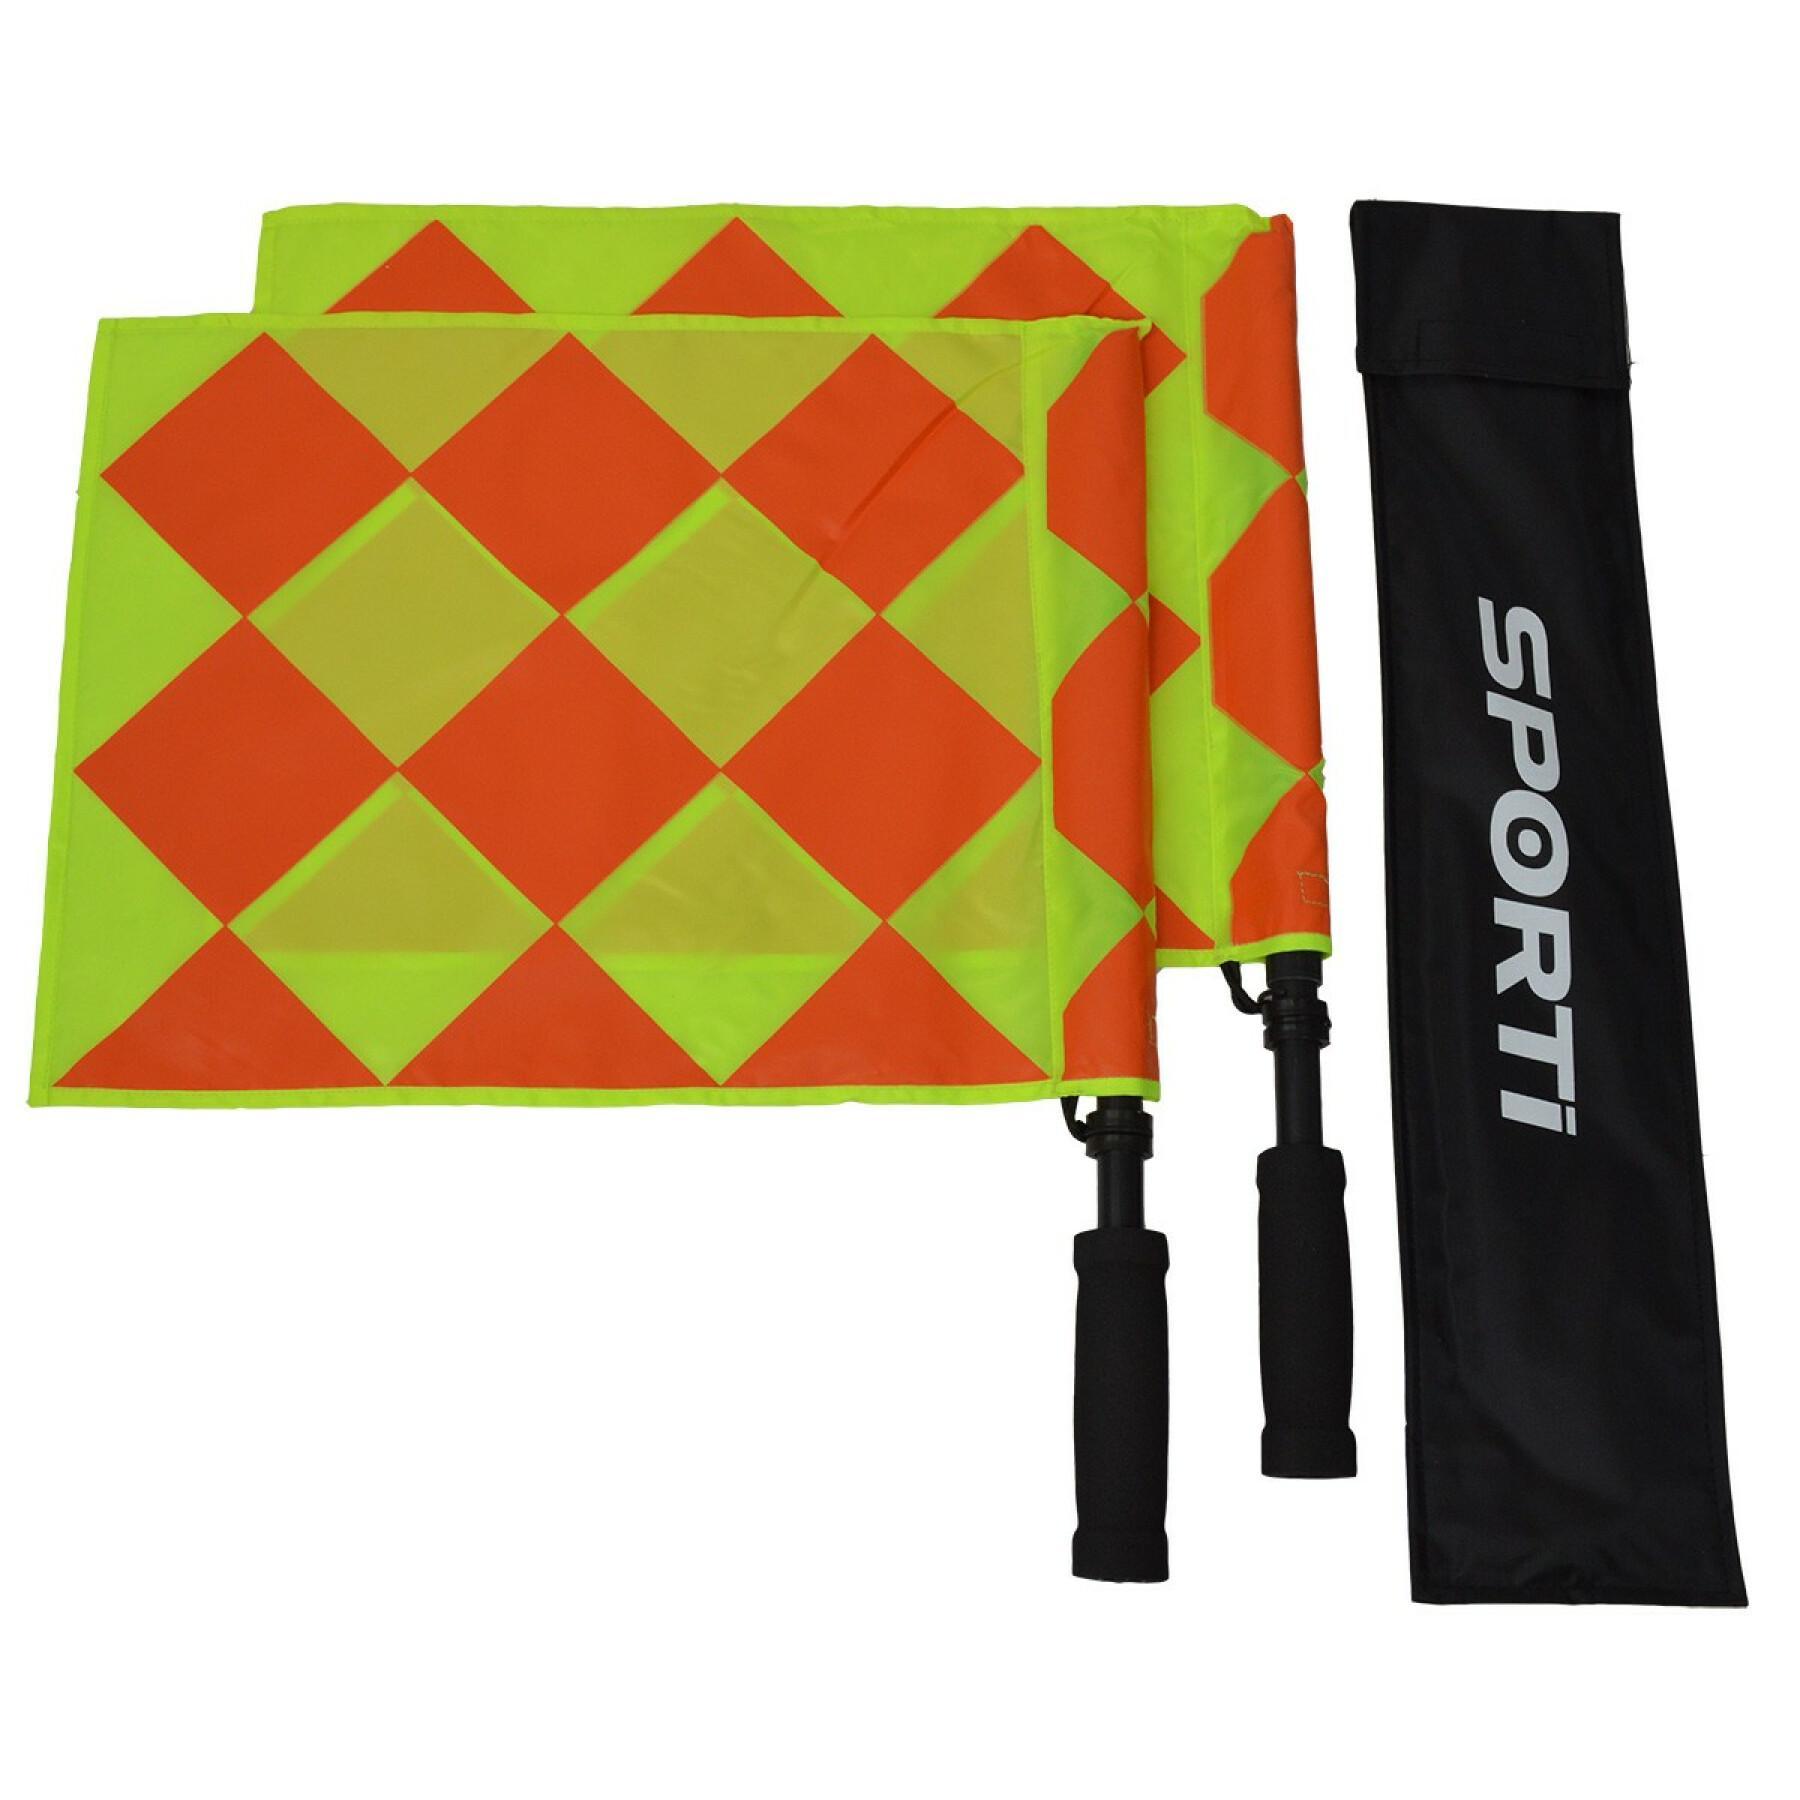 Pair of multi-checkered touch flags Sporti